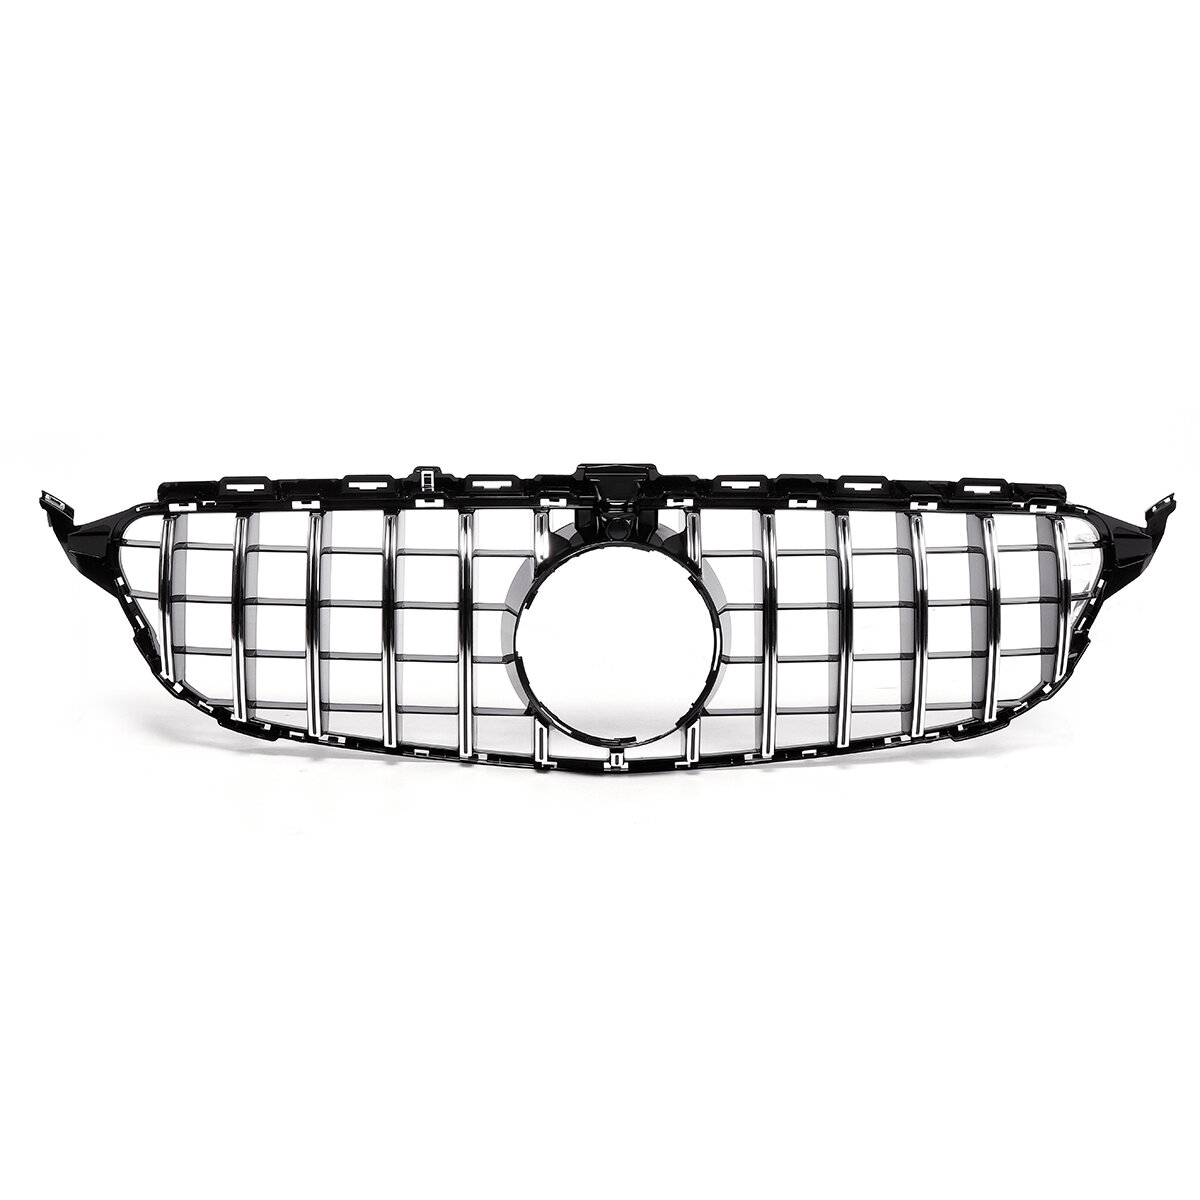 AMG GTR Style Grille Cover For Mercedes-Benz W205 C-Class 2015-2018 with Camera Hole